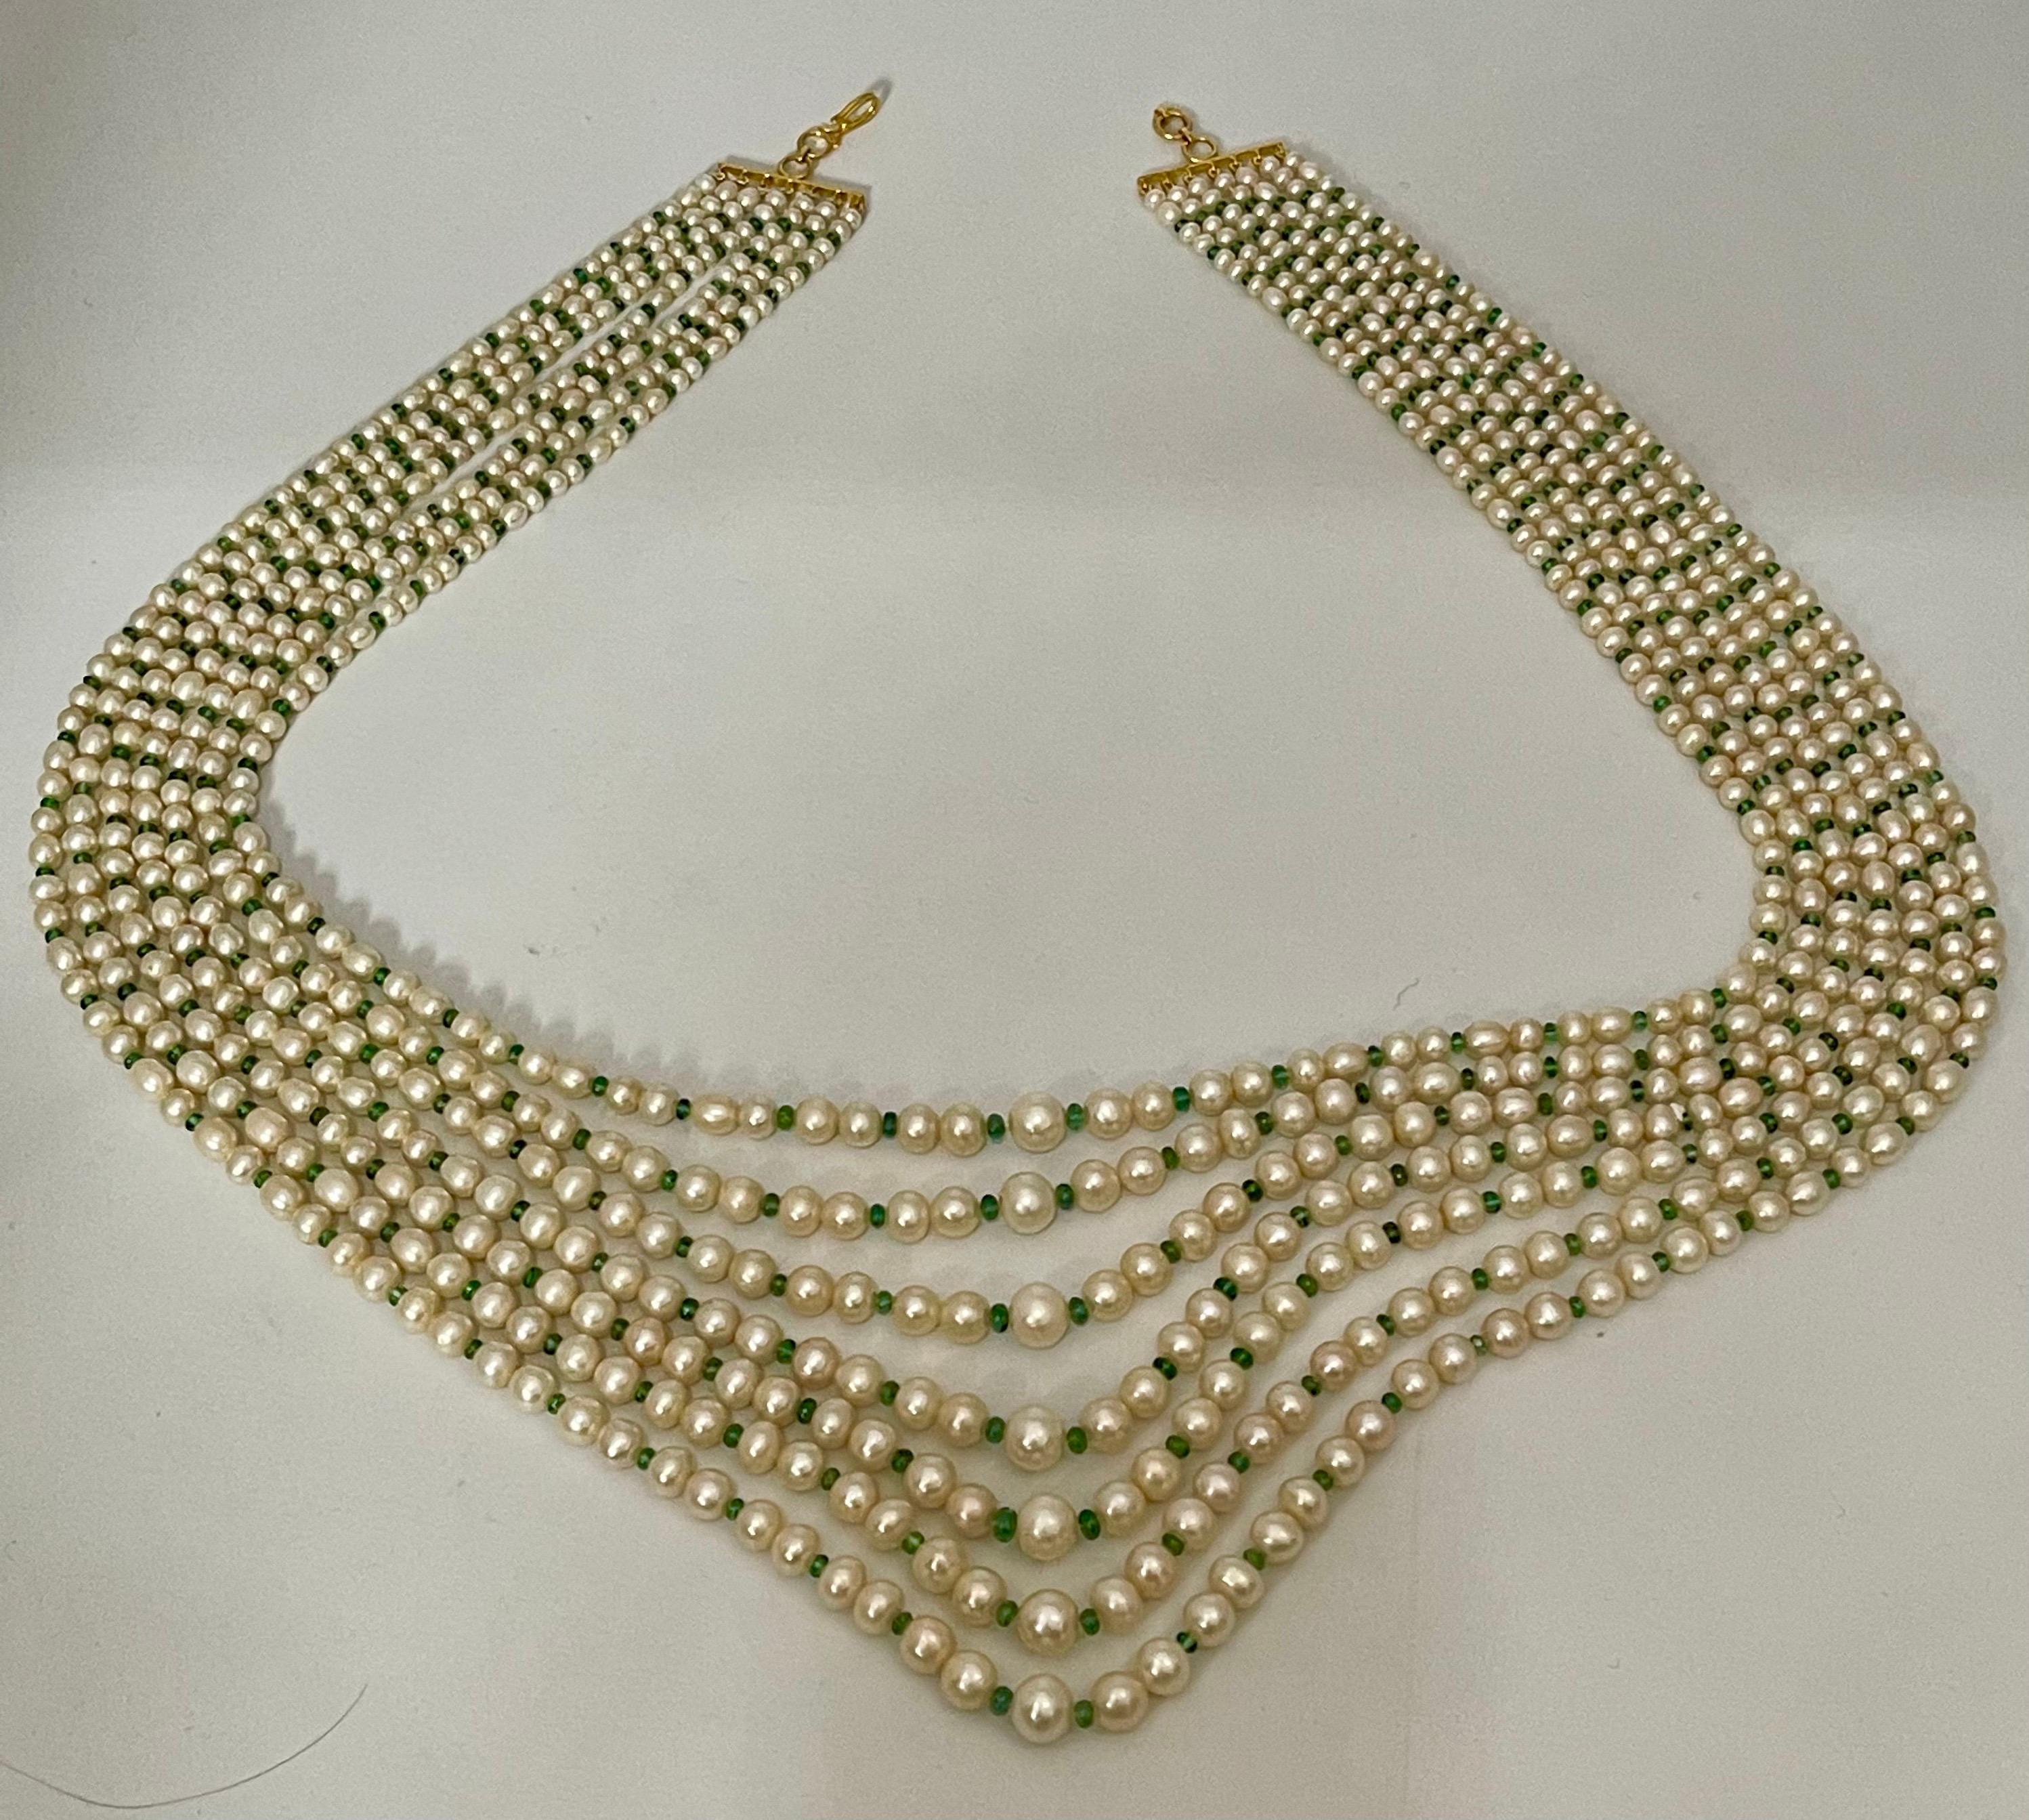 7Layer Fresh Water Pearl , Emerald Bead + 14K Spacer Clasp Opera Length Necklace For Sale 4